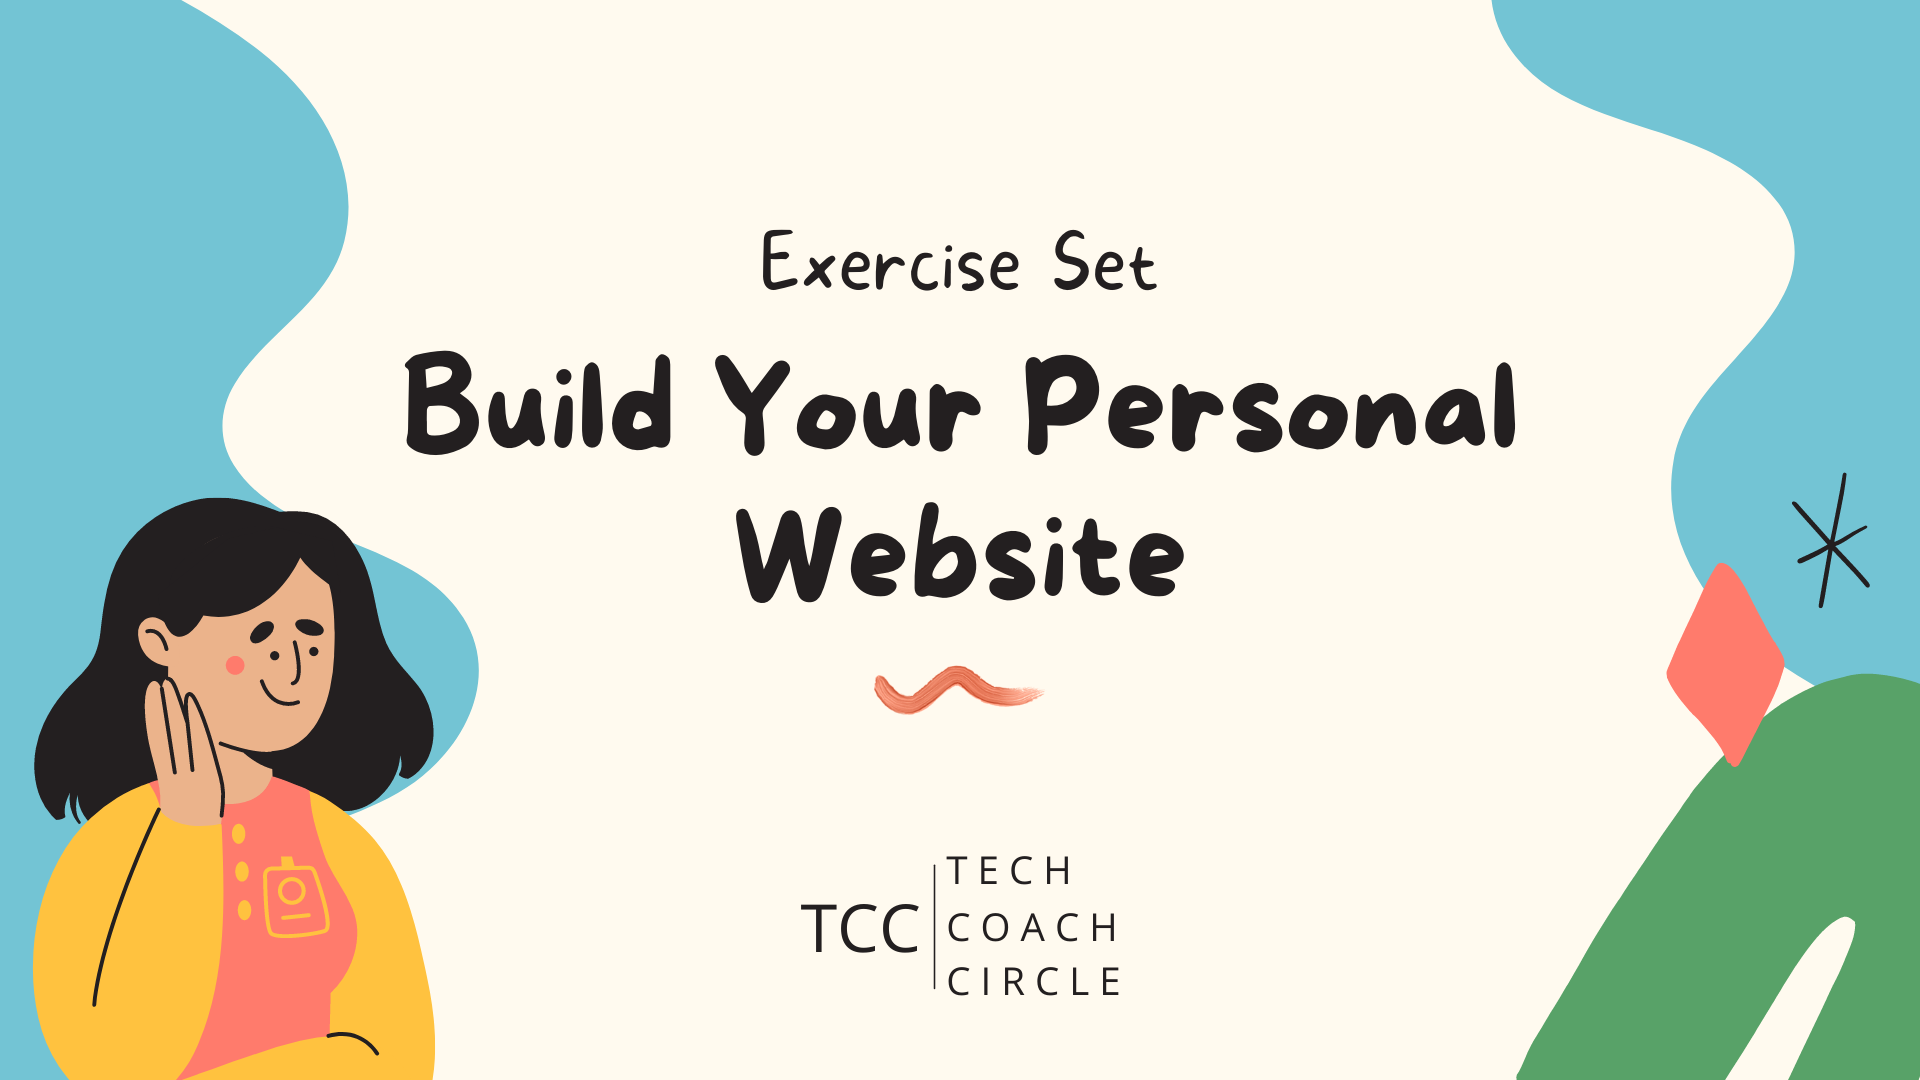 Build Your Personal Website